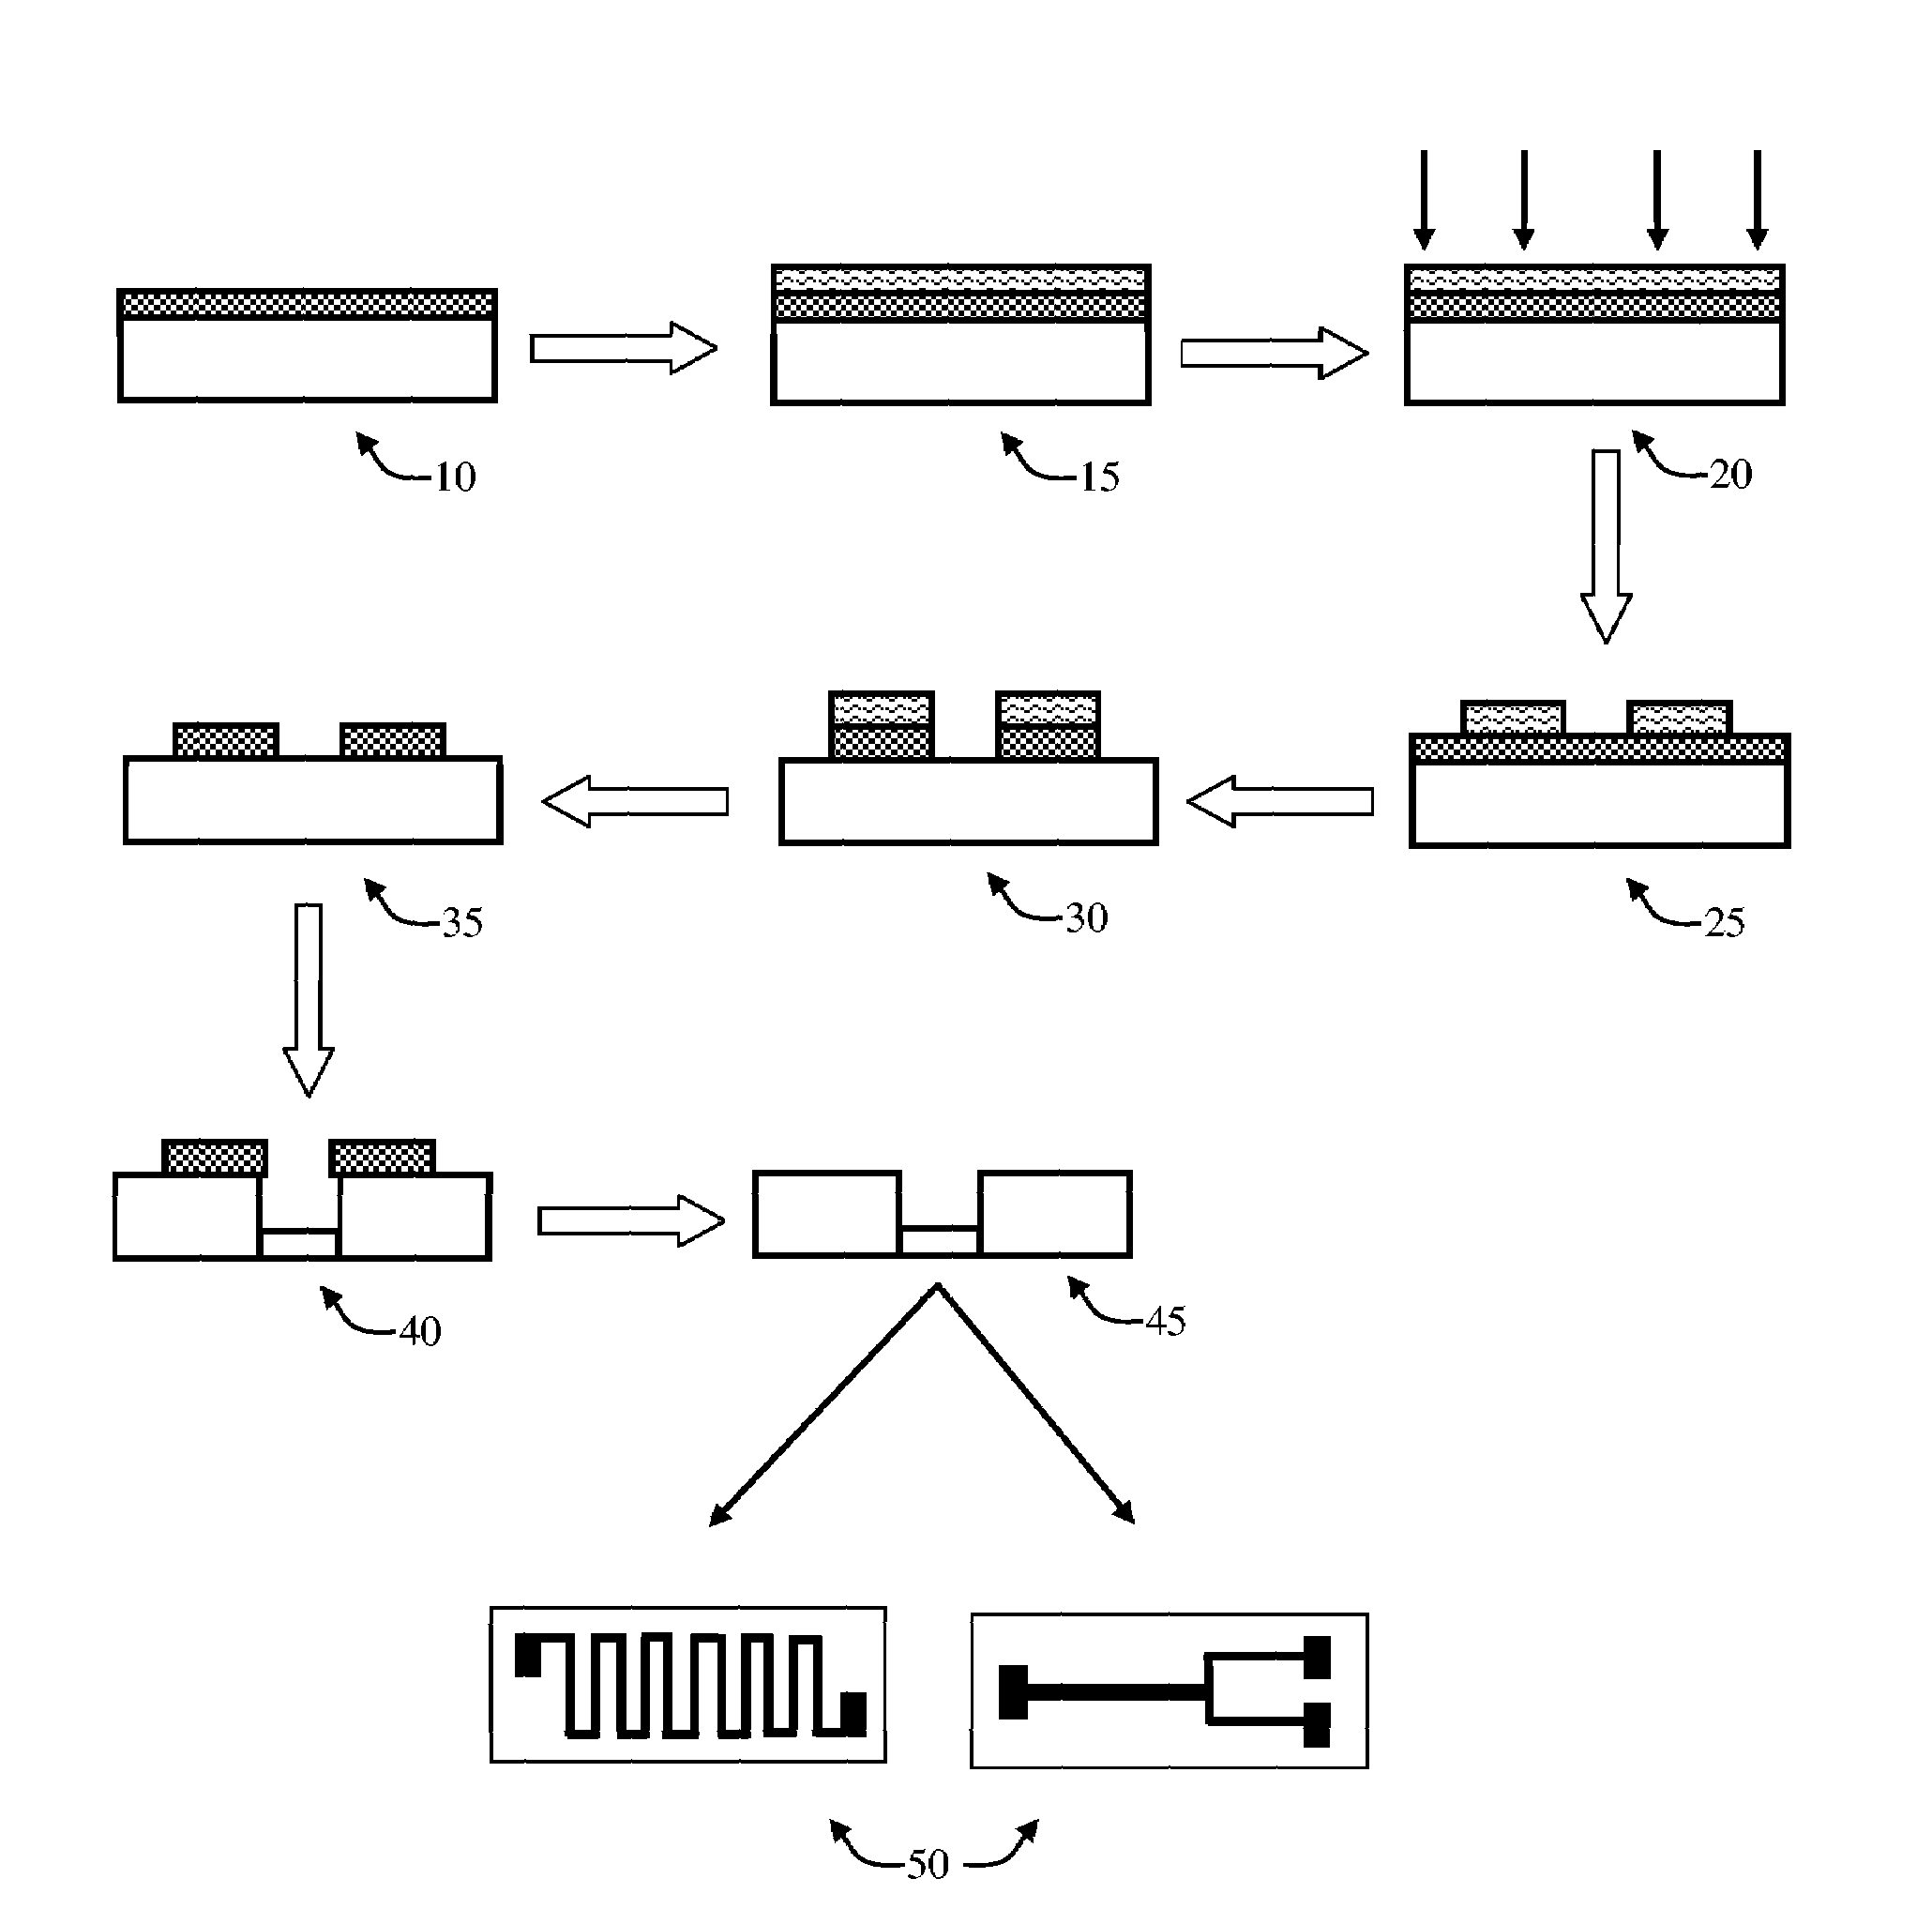 Method for etching microchannel networks within liquid crystal polymer substrates